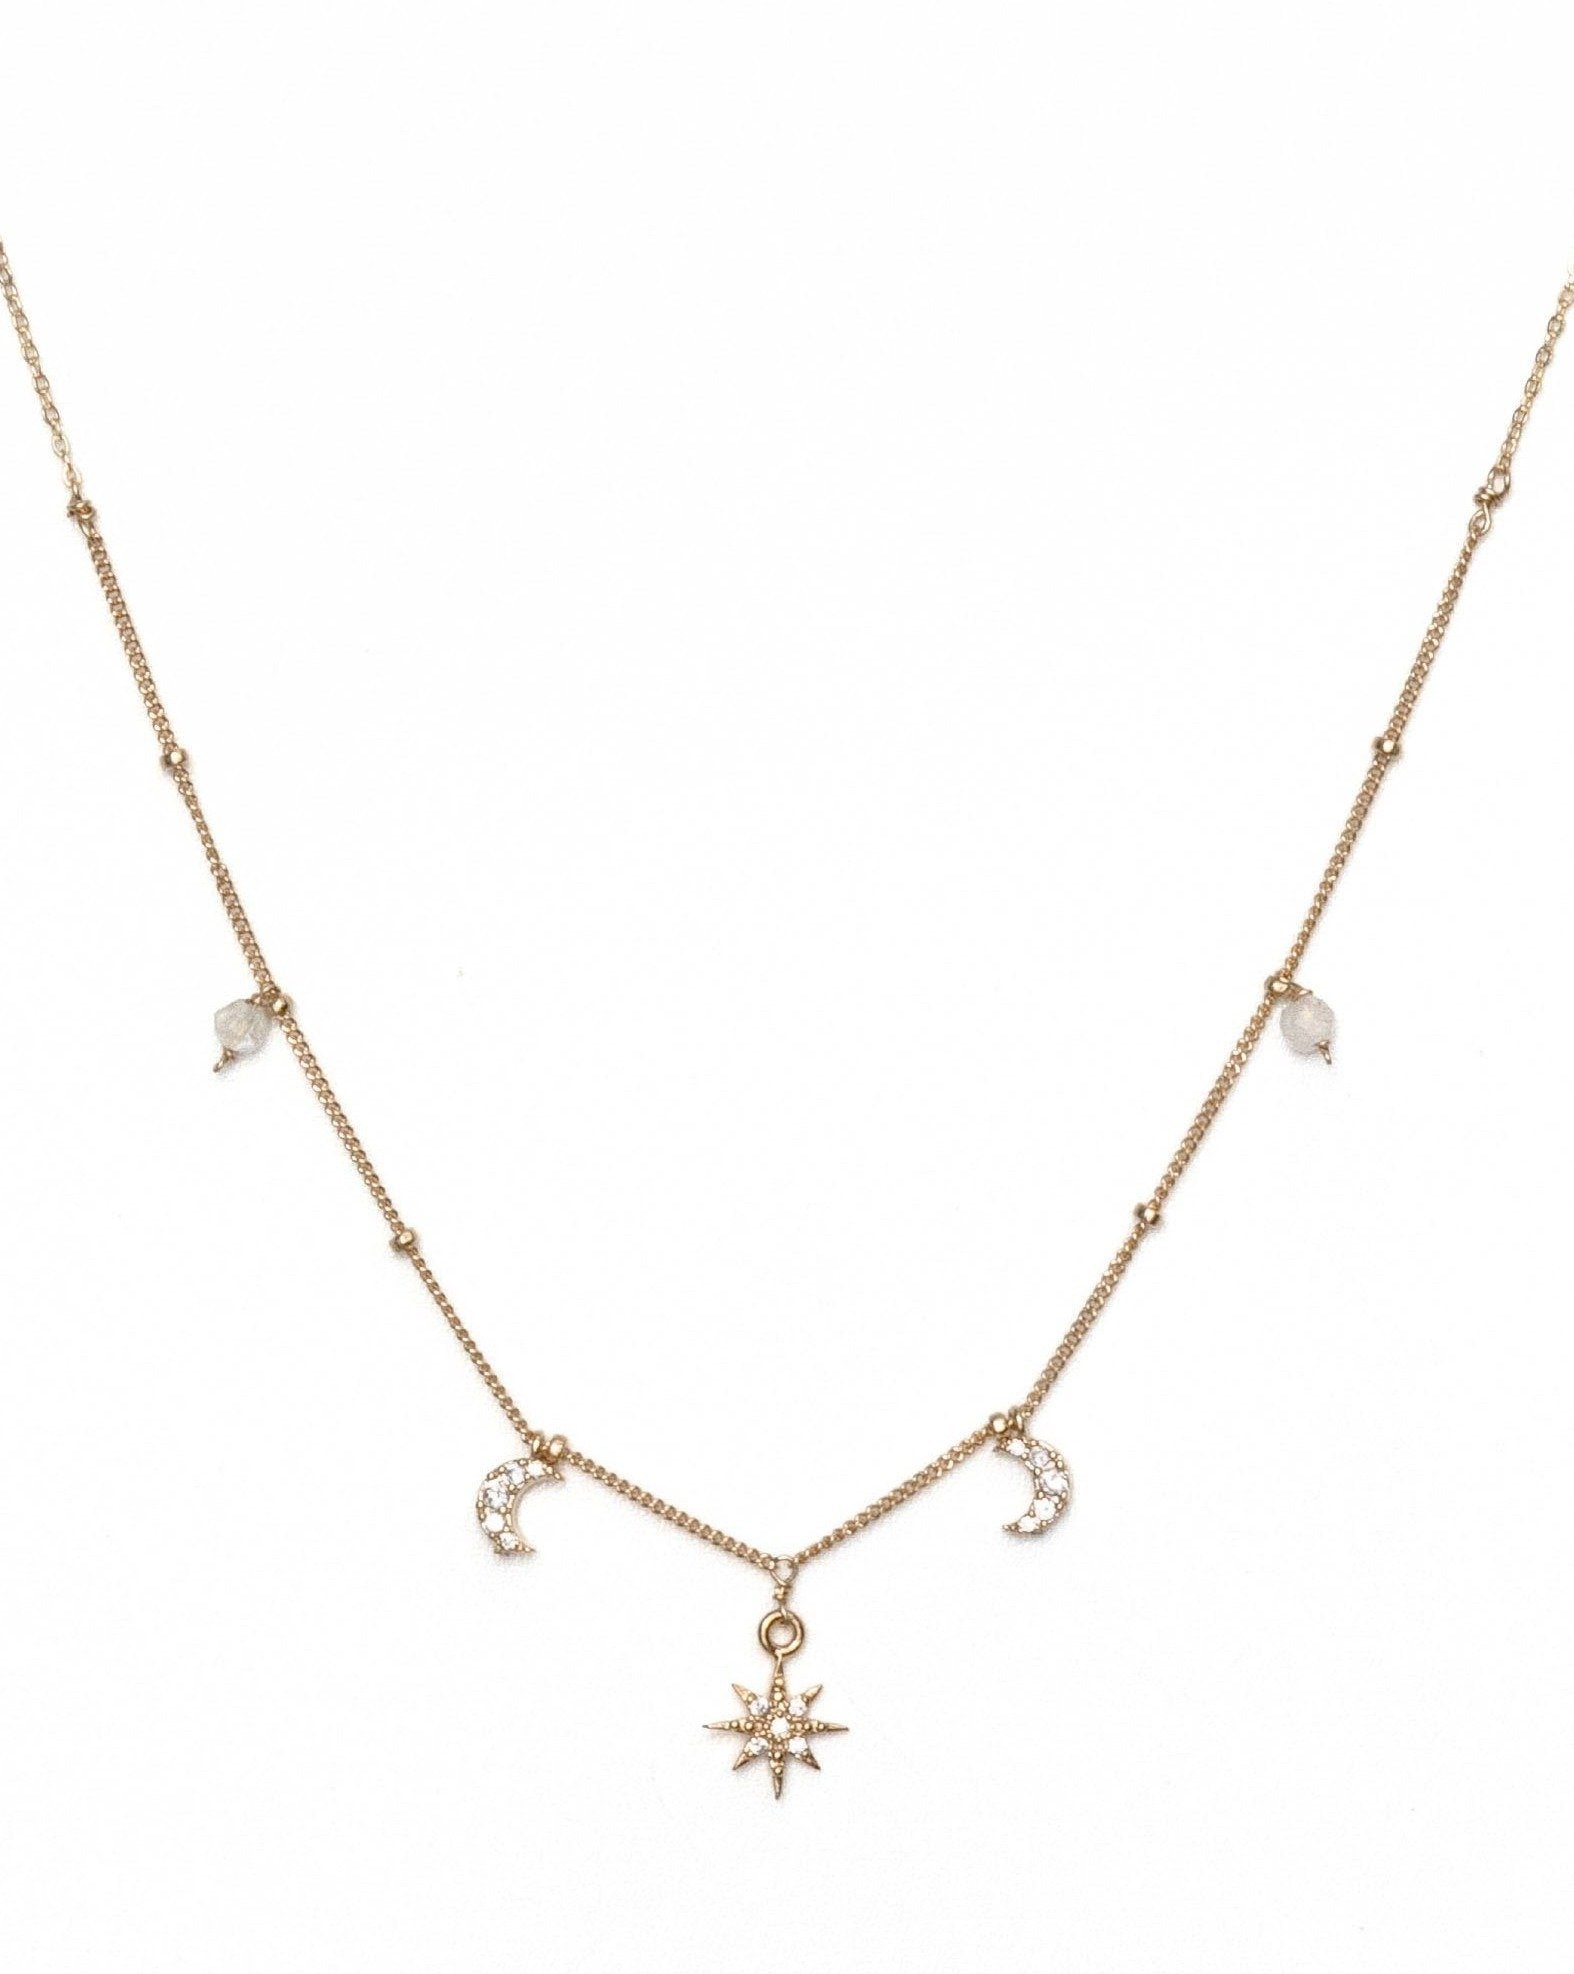 Tara Necklace by KOZAKH. A 16 to 18 inch adjustable length necklace, crafted in 14K Gold Filled, featuring 3mm faceted Moonstones, a Cubic Zirconia encrusted 6 point star charm, and Cubic Zirconia encrusted moon charms.